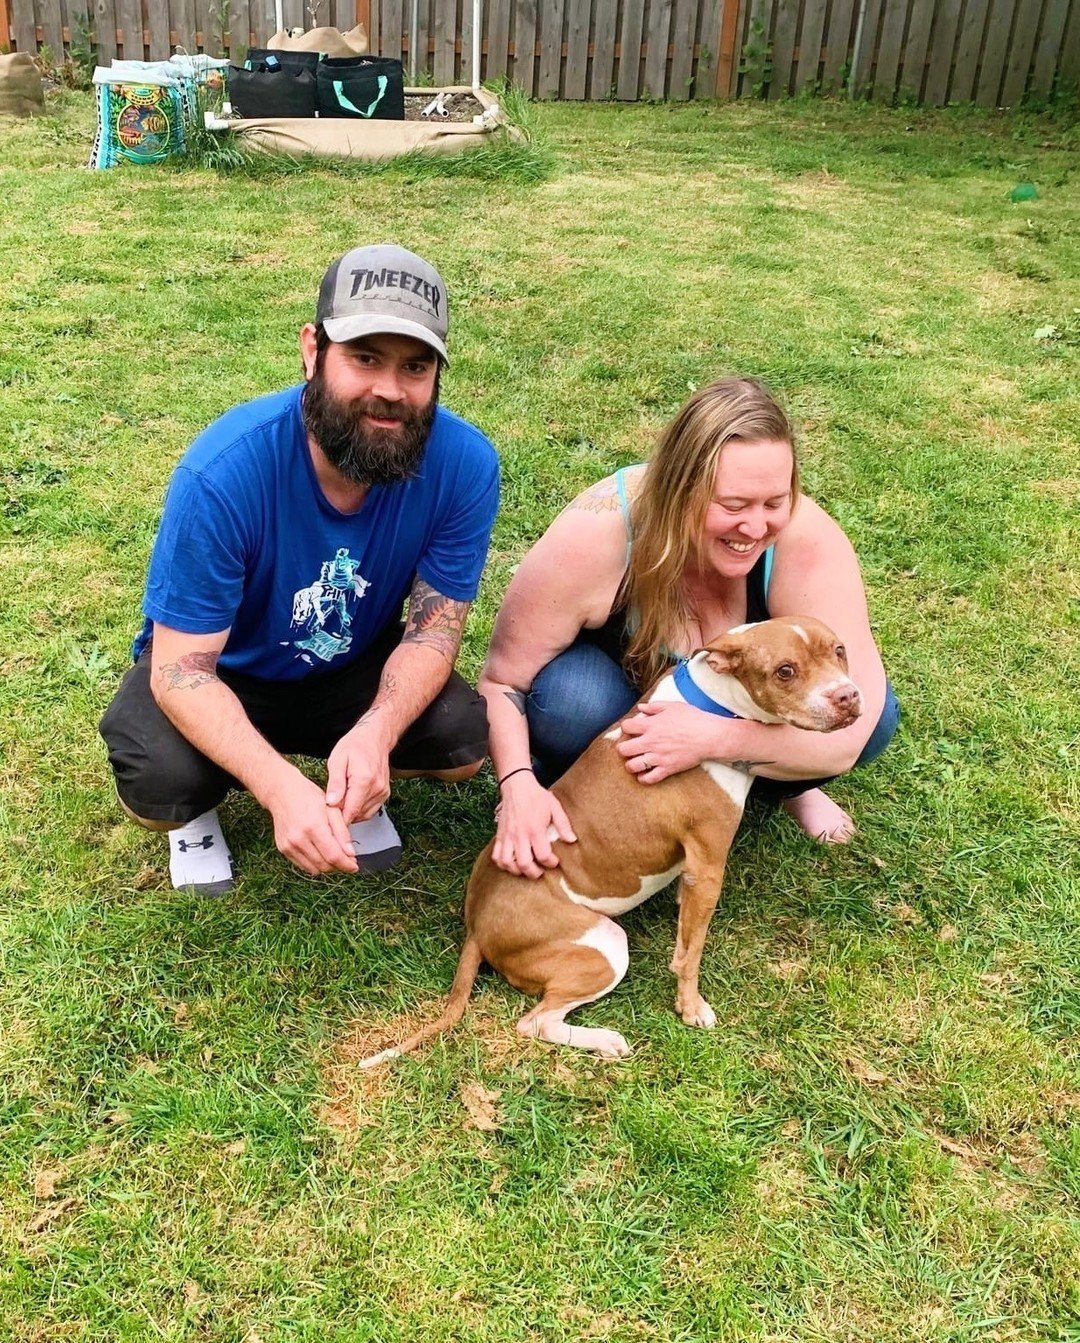 Here's the good news you need to kick off your weekend: as of last night, our senior sweetheart Sandi has been ADOPTED 💙 ⁠
⁠
From the shelter to a home of her own in just under 3 weeks &ndash;&ndash; this is the fairytale ending Sandi deserved. ⁠
⁠
